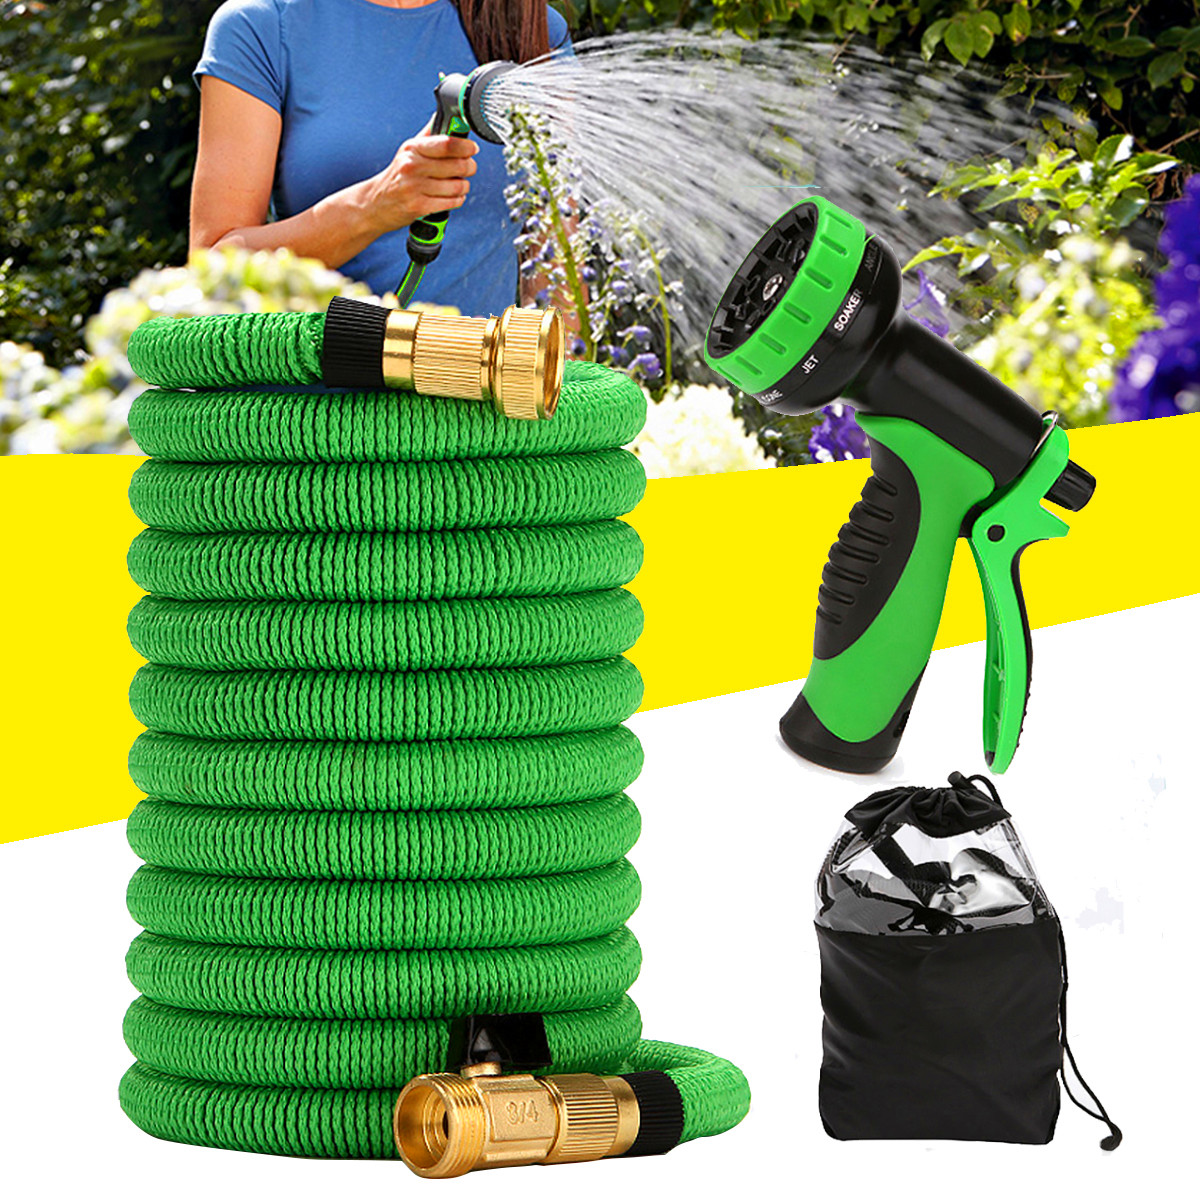 25-100ft-Expandable-Flexible-Garden-Water-Hose-Water-Pipe-Watering-Sprayer-1807695-1